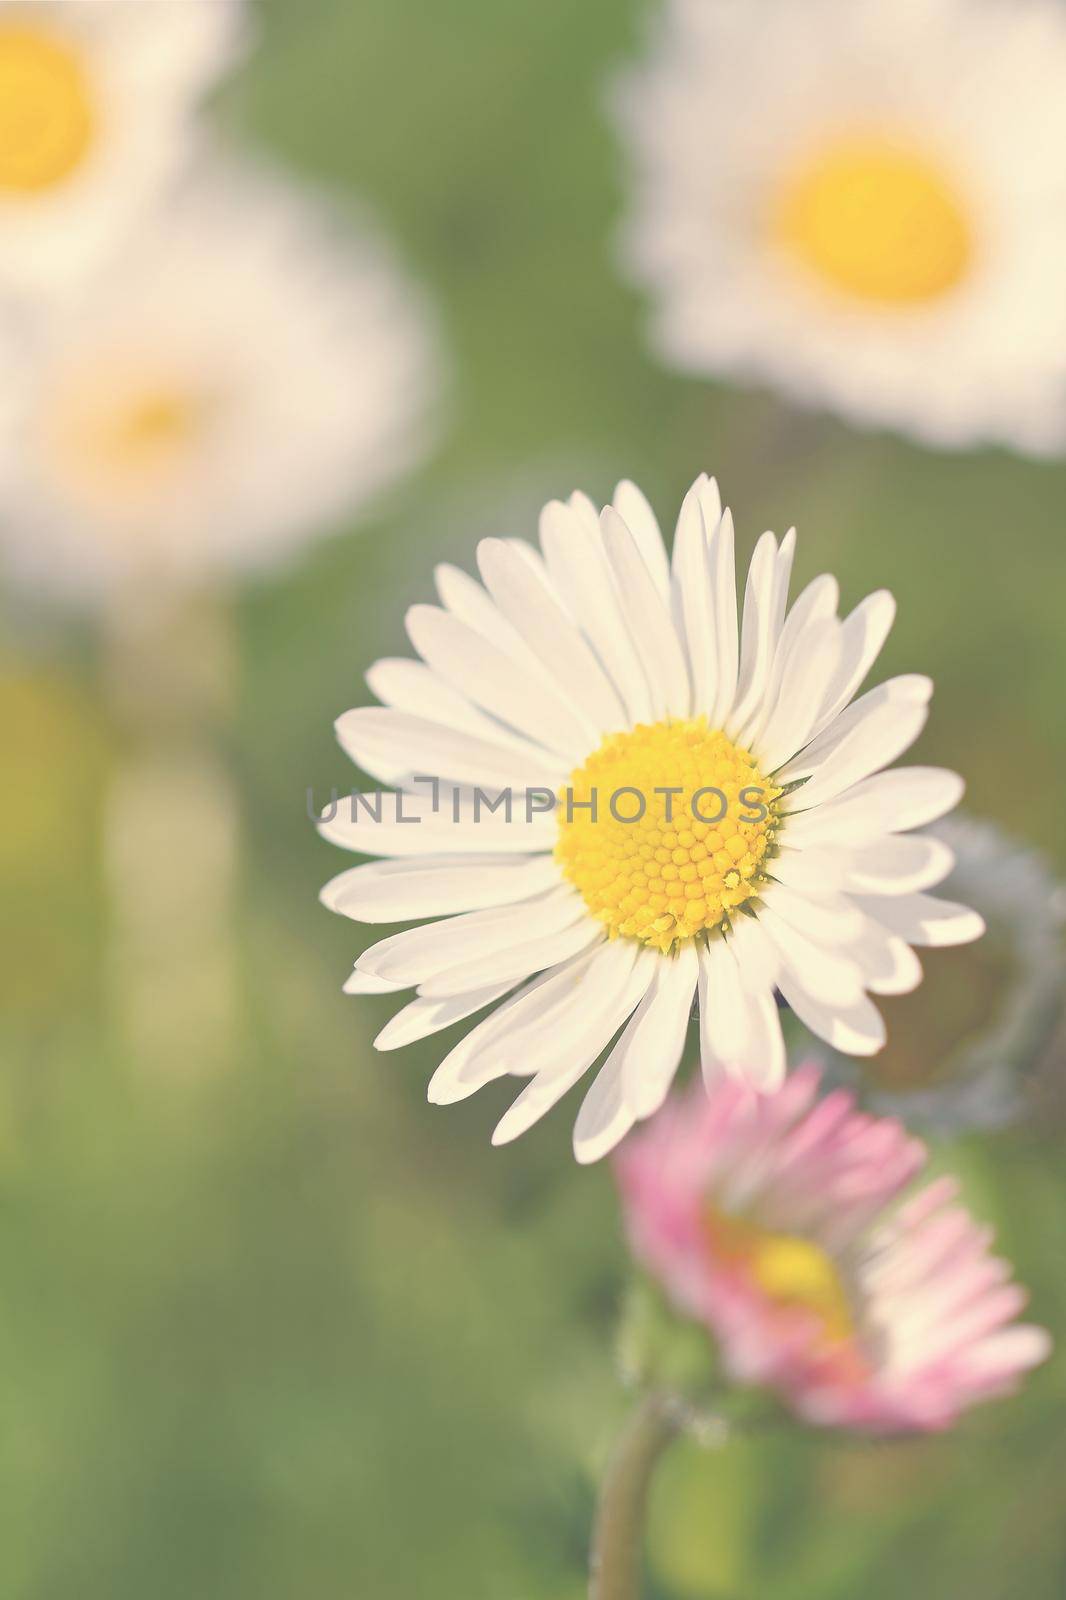 Spring flower - daisy. Macro shot of spring nature up close.